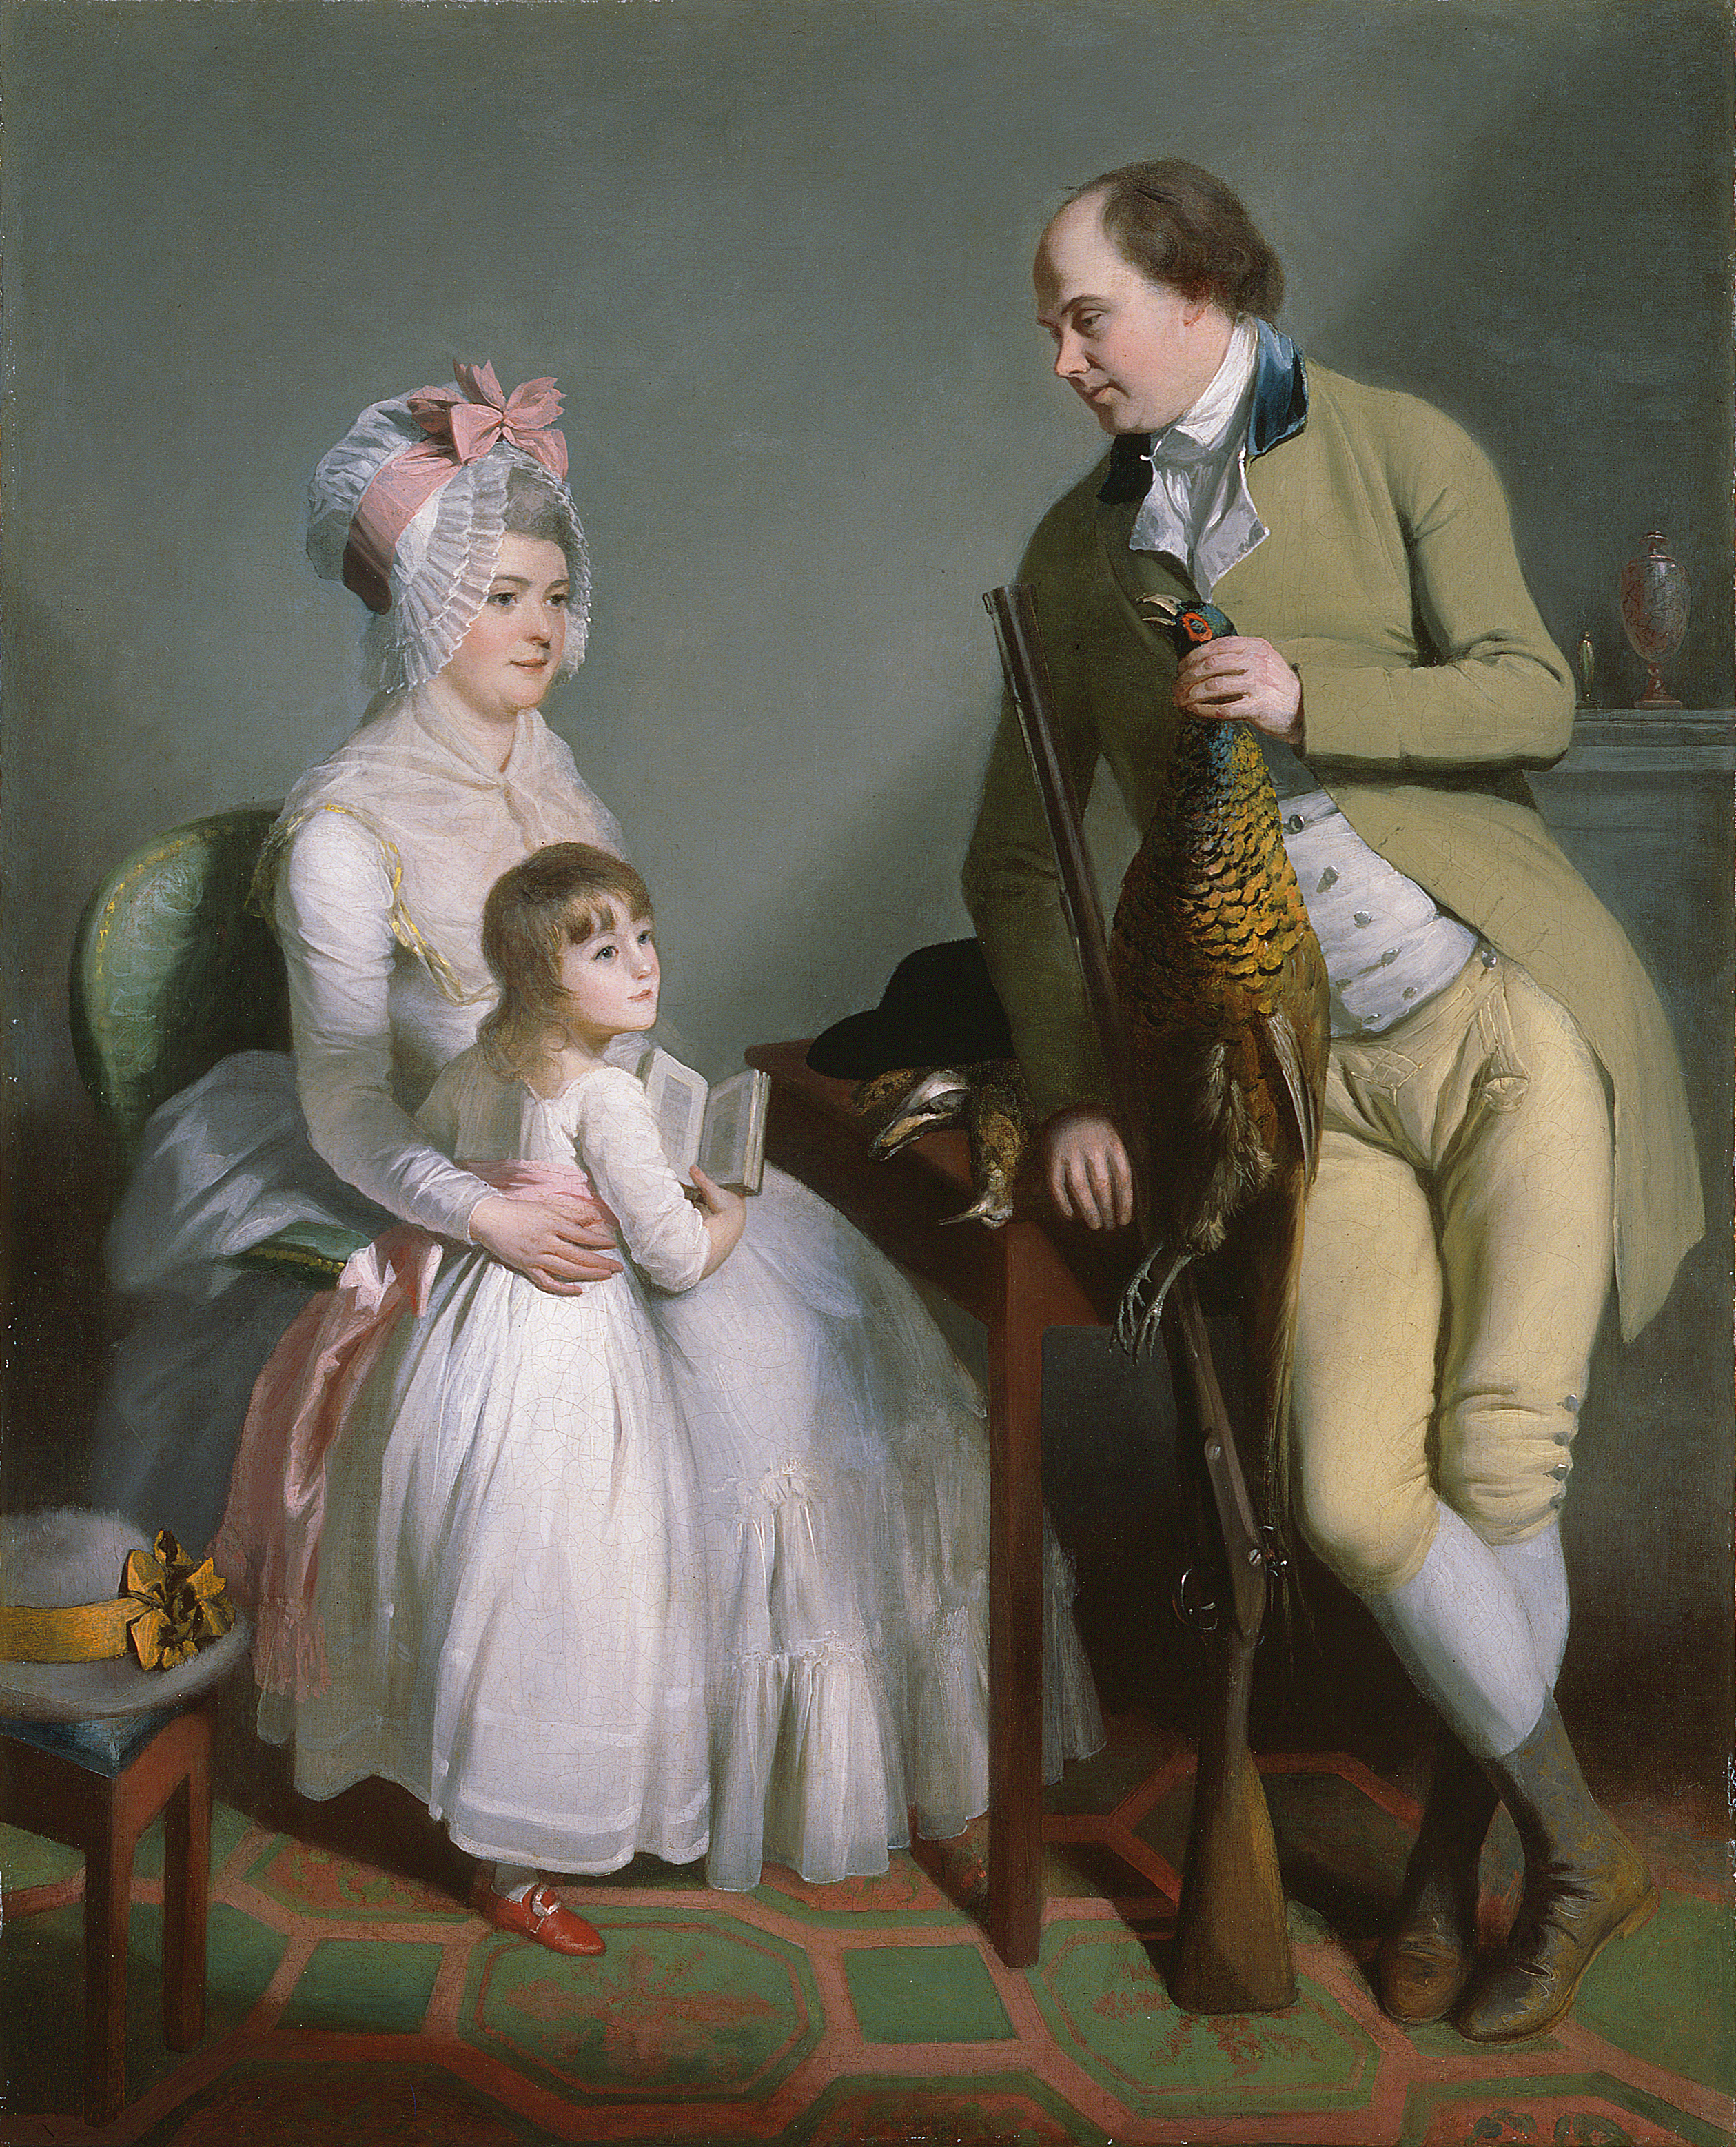 Oil painting showing a seated woman in a white dress with a child in a white dress leaning on her knees. A main in a green suit stands to their left, leaning on the arm of the chair. He is carrying a dead pheasant in one hand,